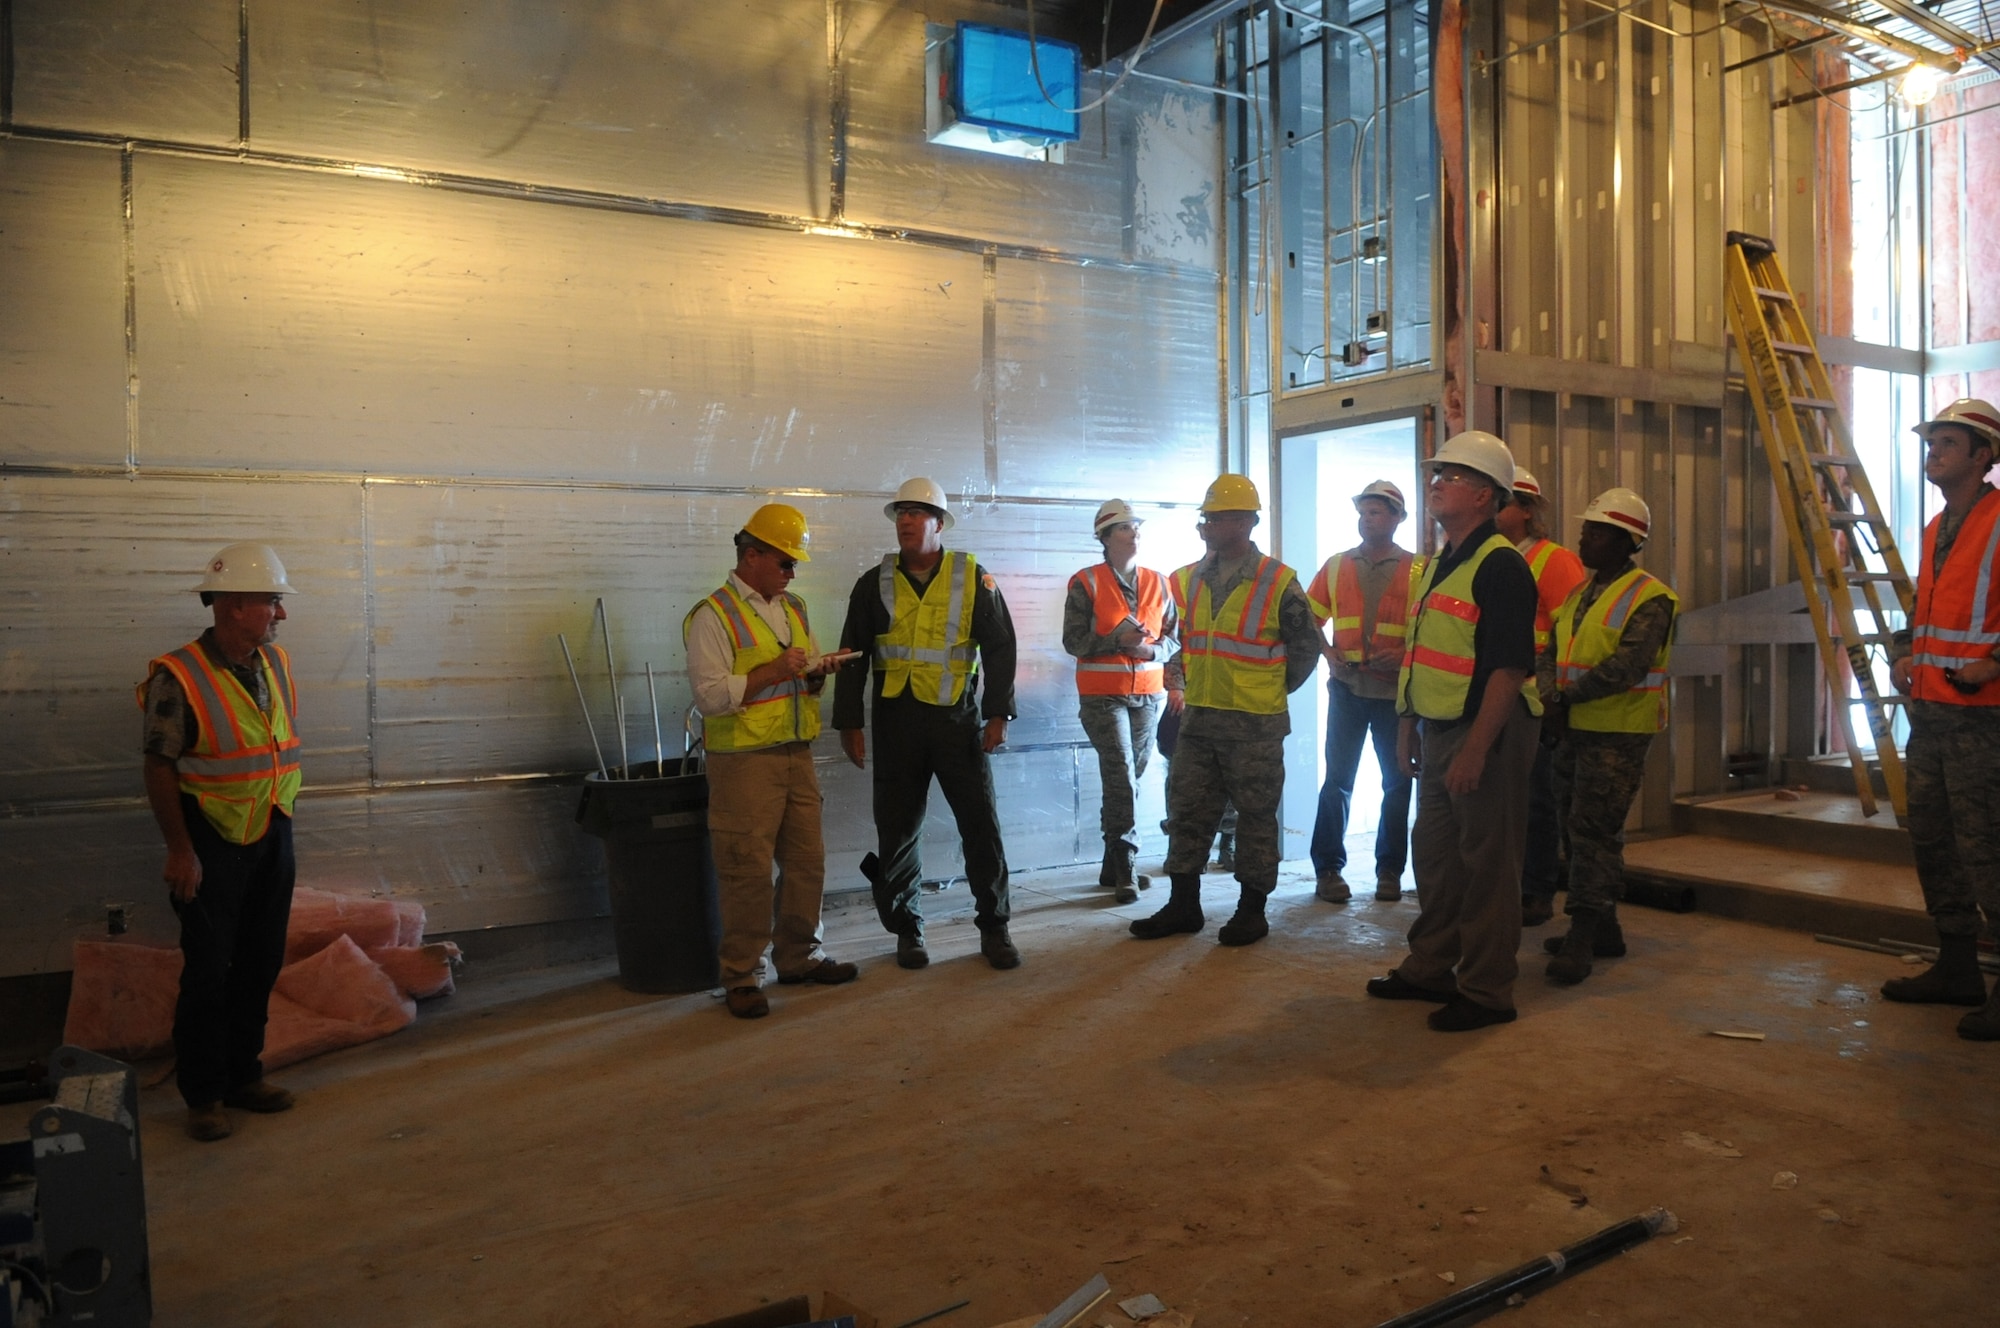 Members of an F-35 construction team give an Arizona Republic reporter a tour of one of the unfinished buildings July 18 at Luke Air Force Base. Luke will eventually have six squadrons and 144 F-35A jets. (U.S. Air Force photo/Airman 1st Class Devante Williams)